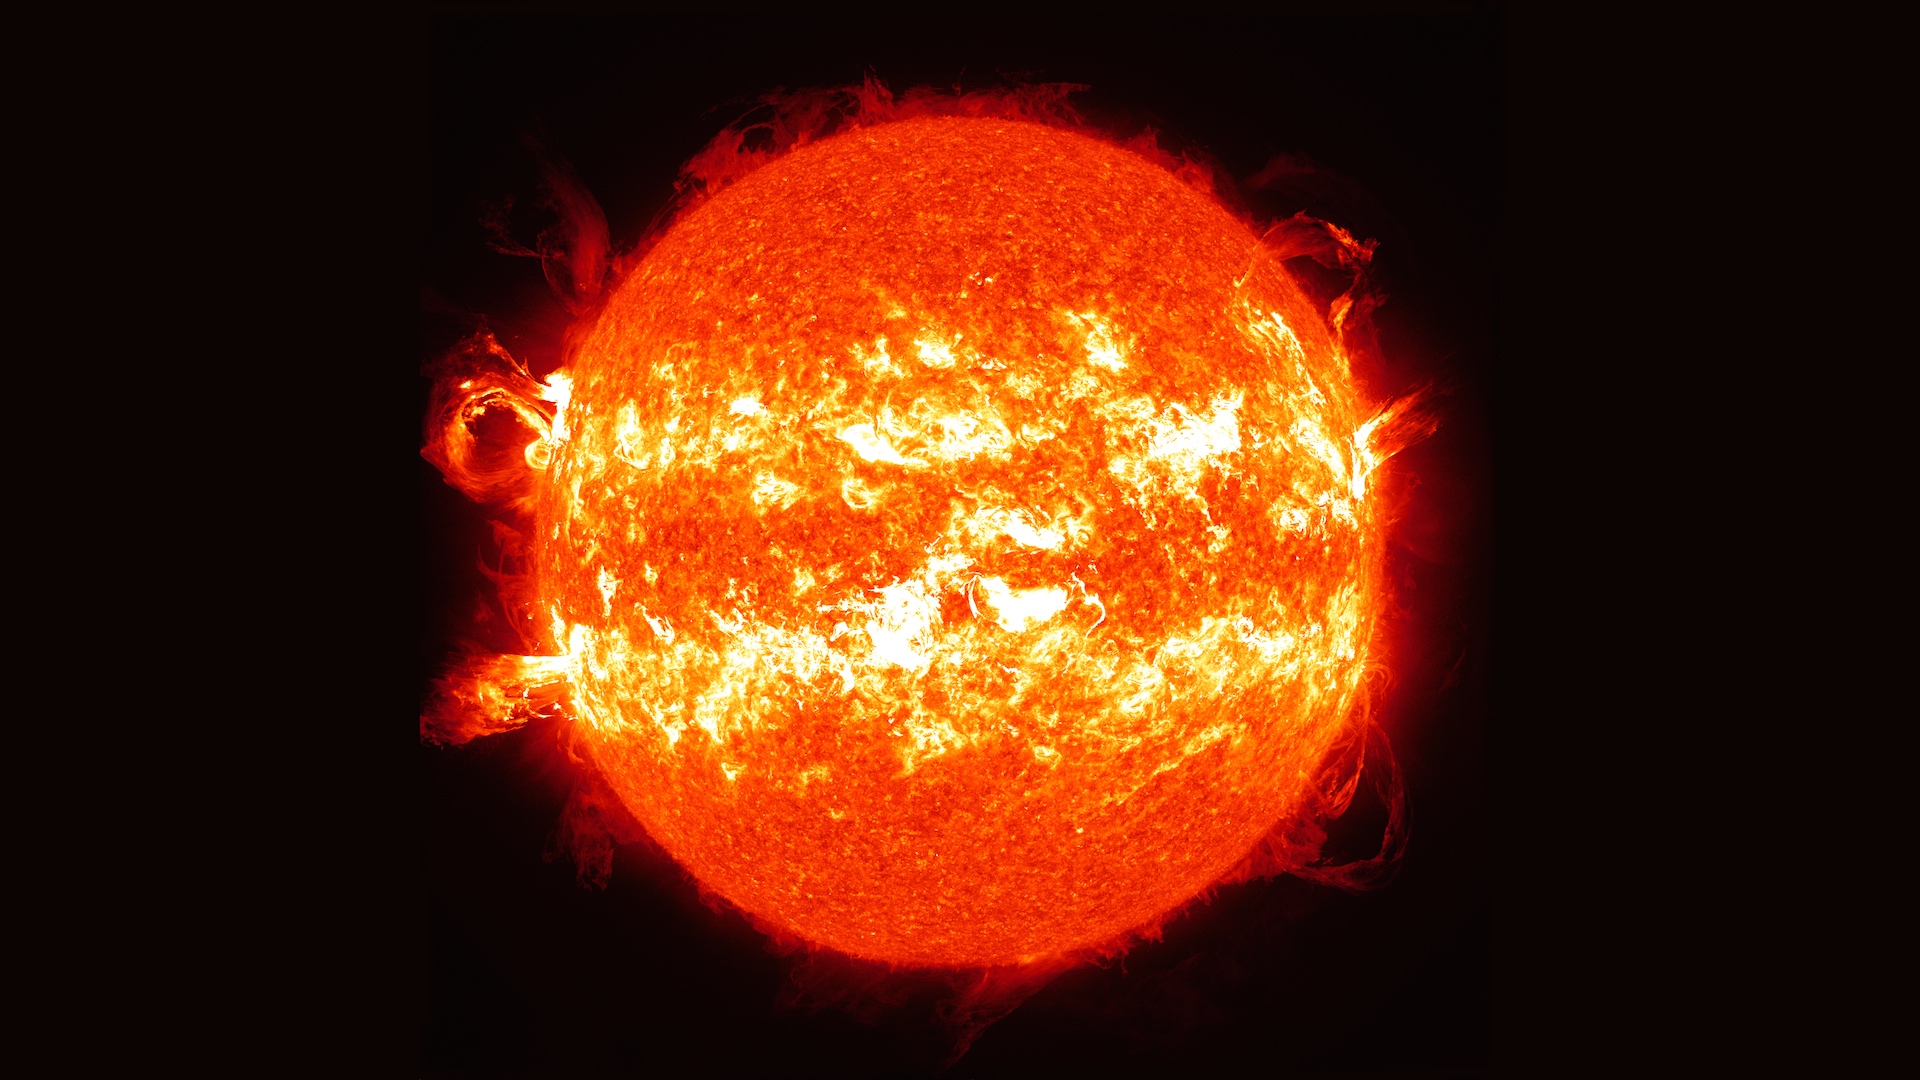 Massive solar flares, graceful eruptions of solar material, and an enormous sunspot make up some of the imagery captured by NASA's Solar Dynamics Observatory during its fourth year in orbit. Music: Stella Maris courtesy of Moby Gratis.Watch this video on the NASA Goddard YouTube channel.For complete transcript, click here.